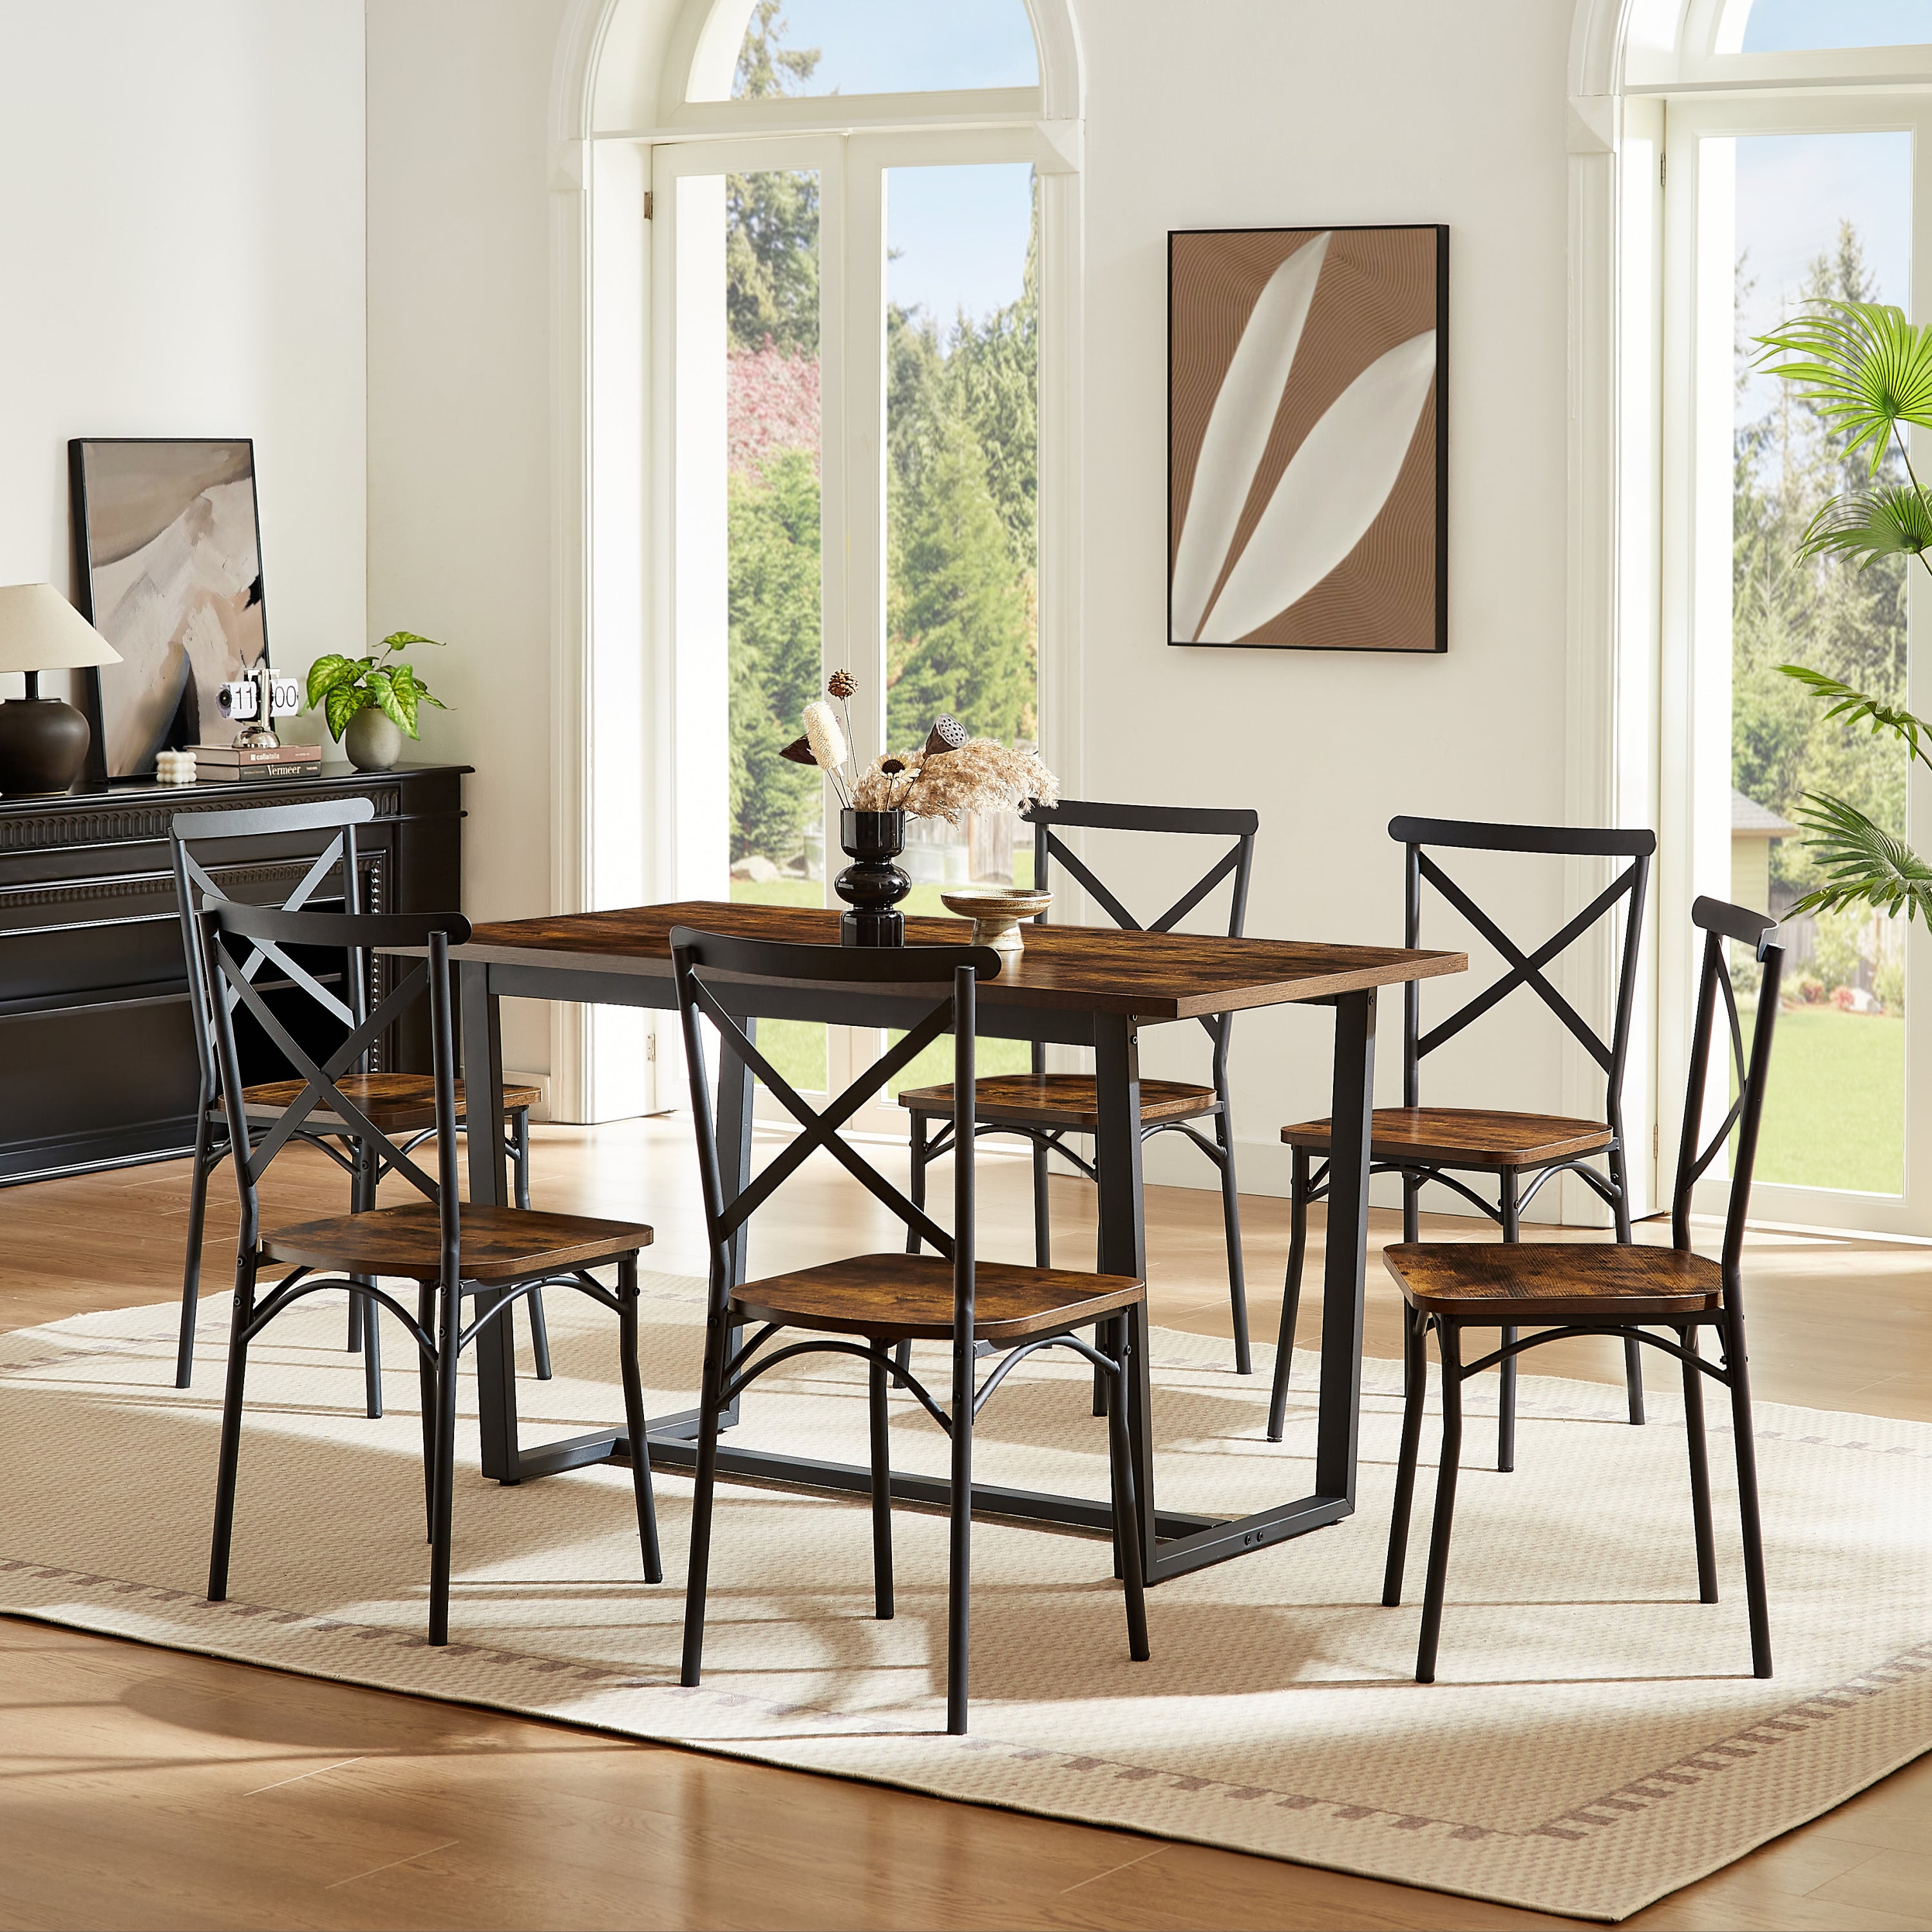 🆓🚛 7-Piece Kitchen Table Set, 1 Table, 6 Chairs, Perfect for Kitchen, Breakfast Nook, Living Room Occasions, Brown